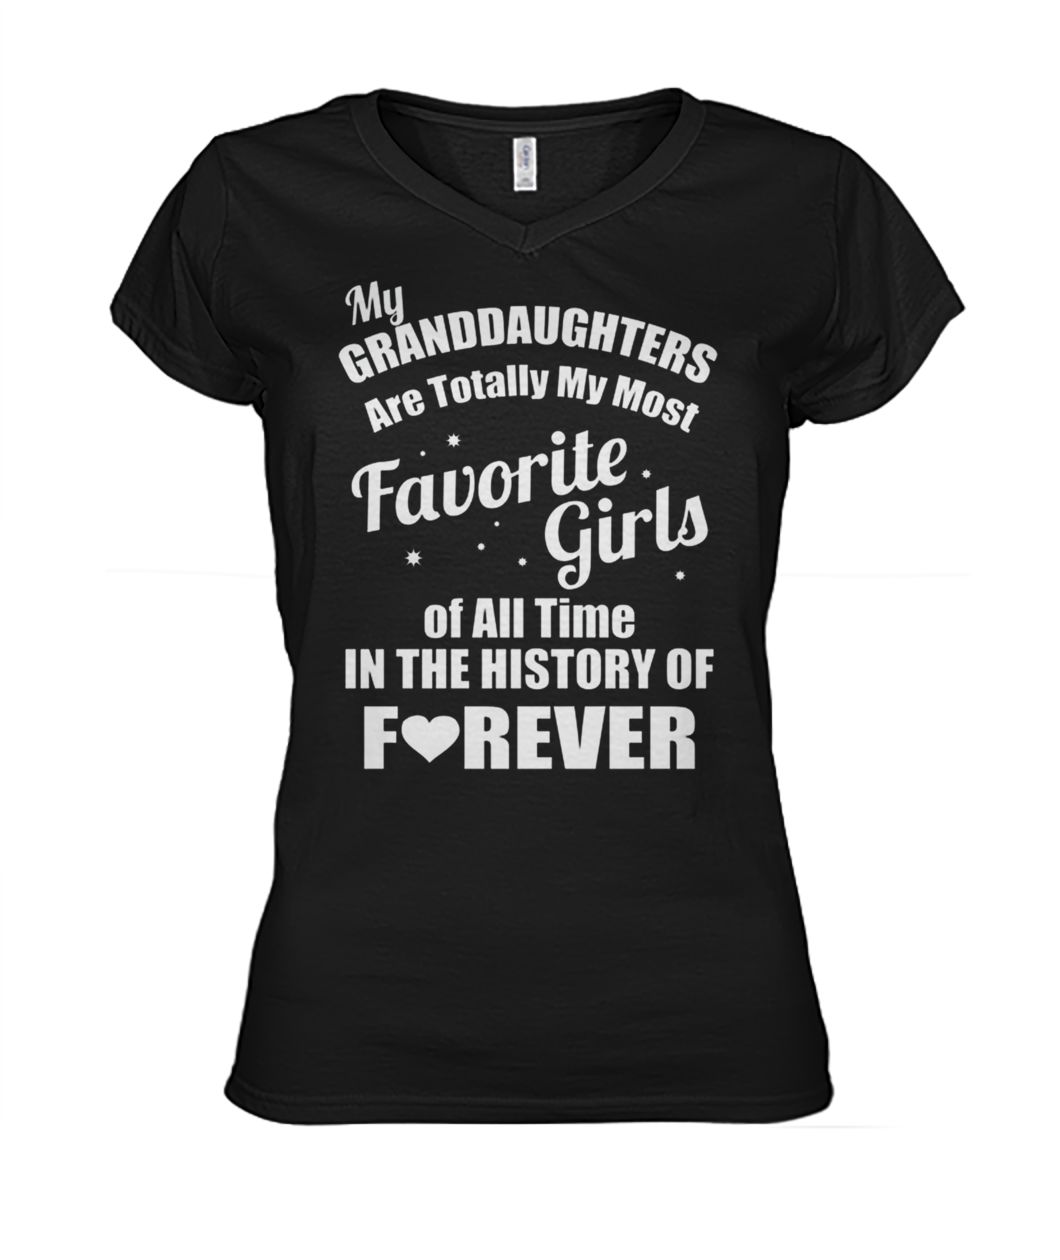 My granddaughter is totally my most favorite girl of all time in the history of forever women's v-neck